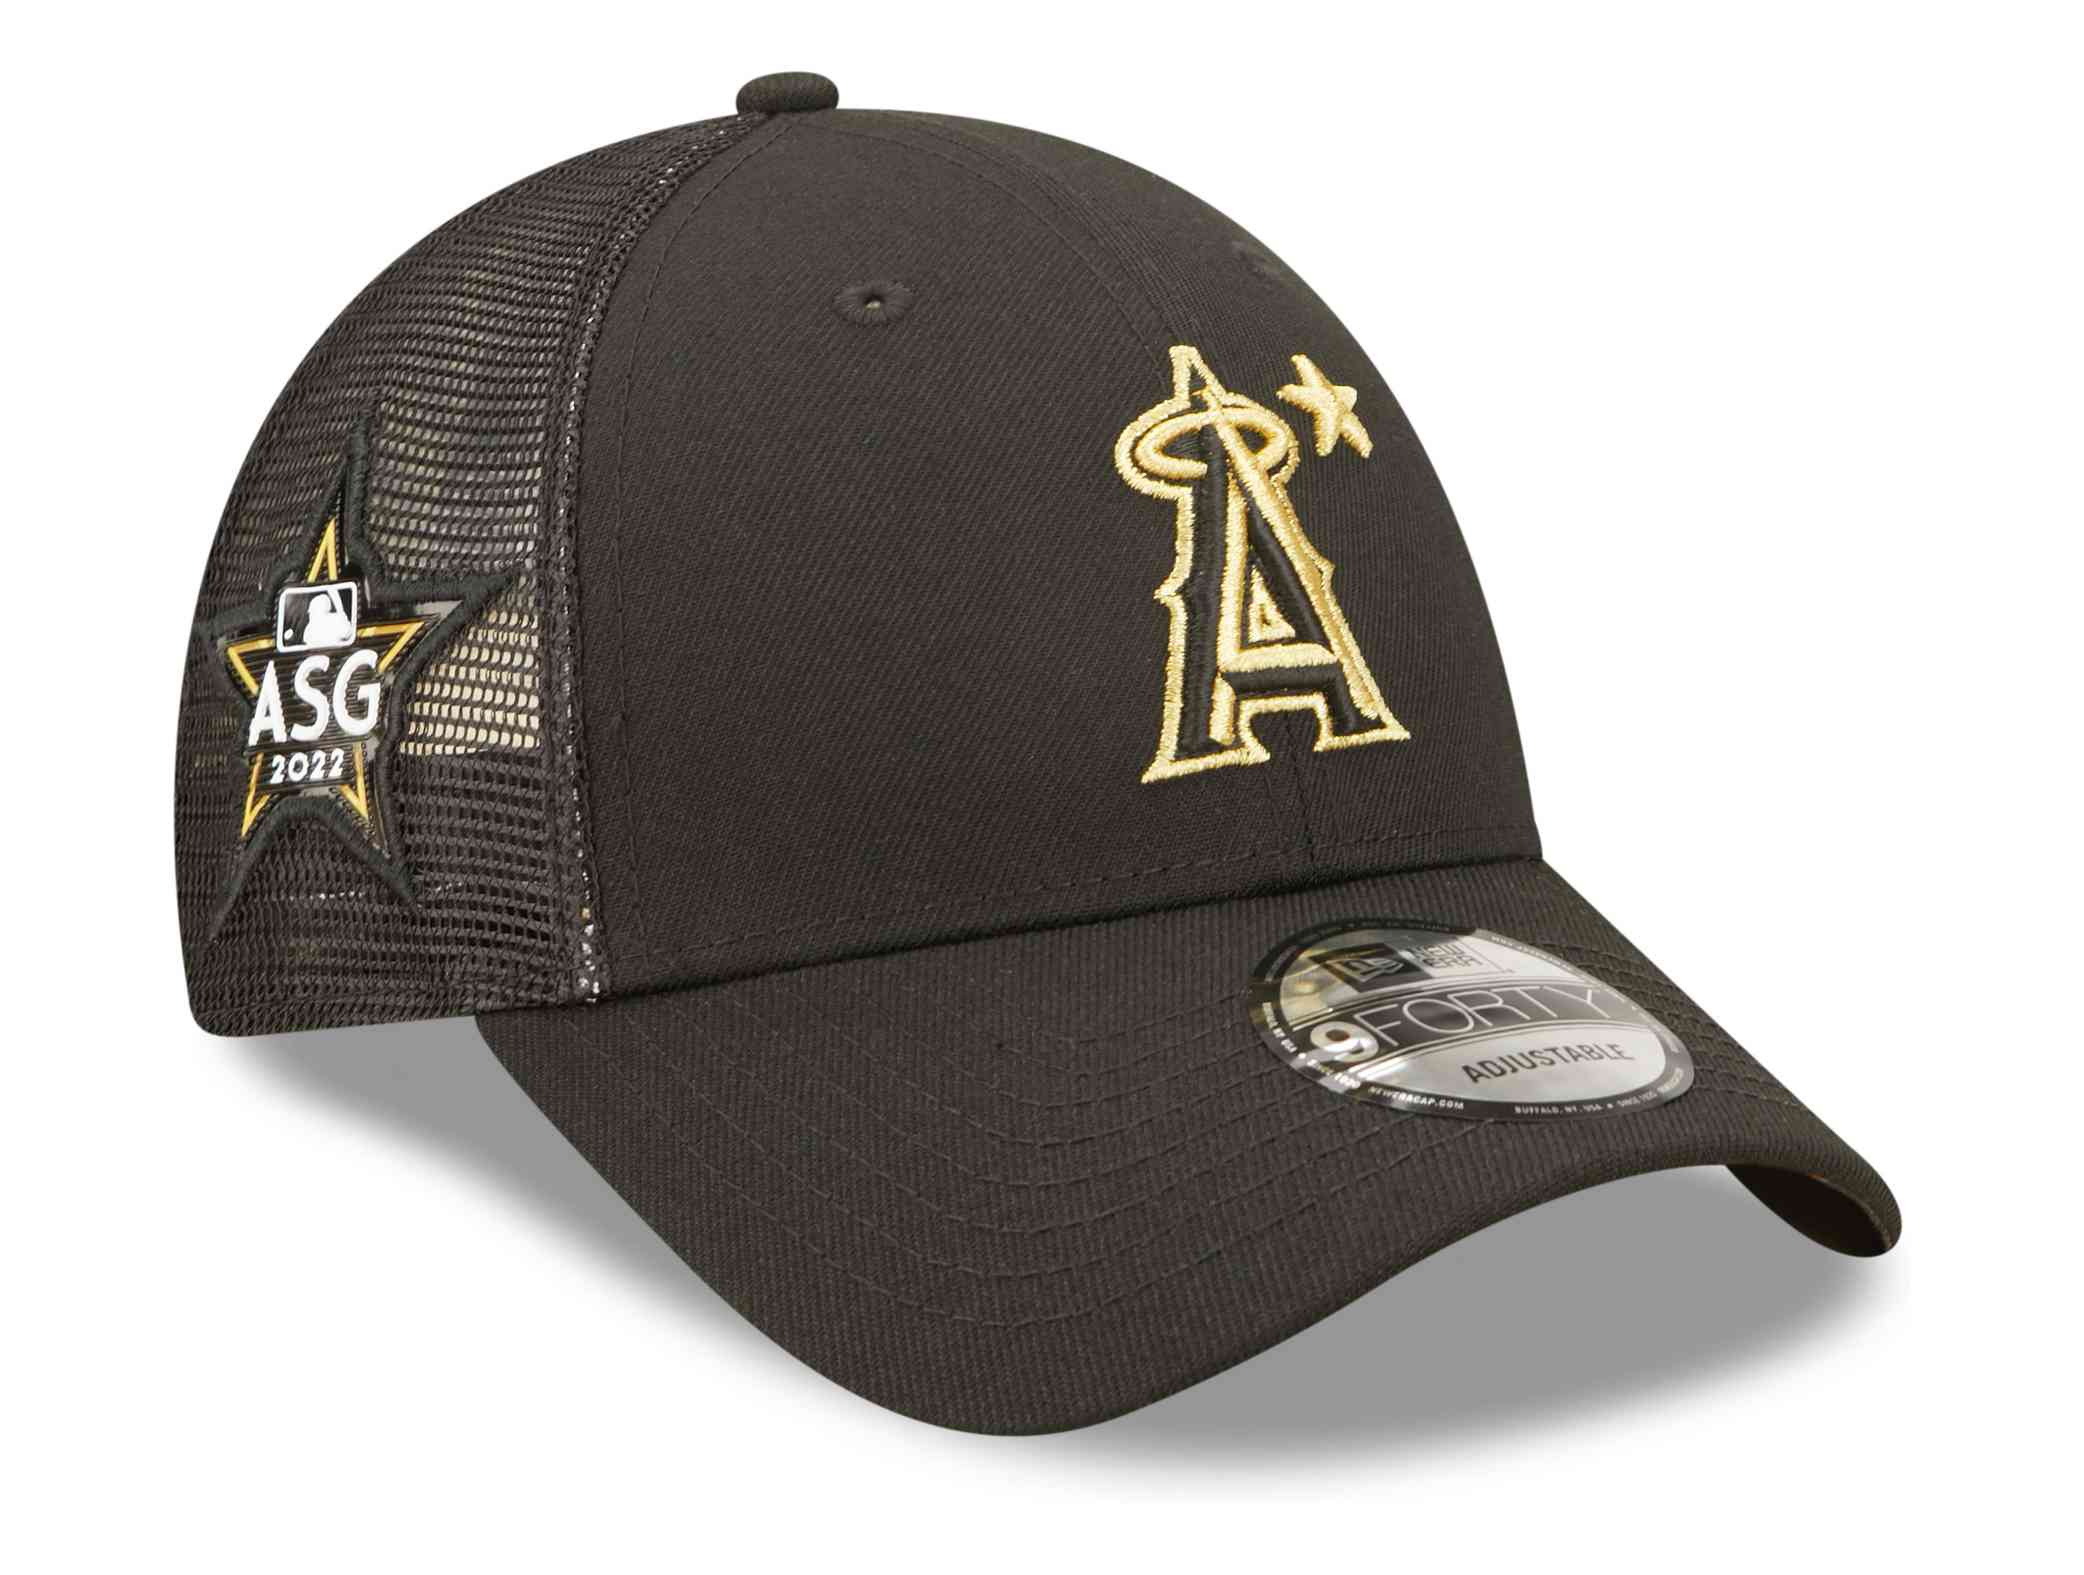 New Era - MLB Los Angeles Angels All Star Game Patch 9Forty Snapback Cap